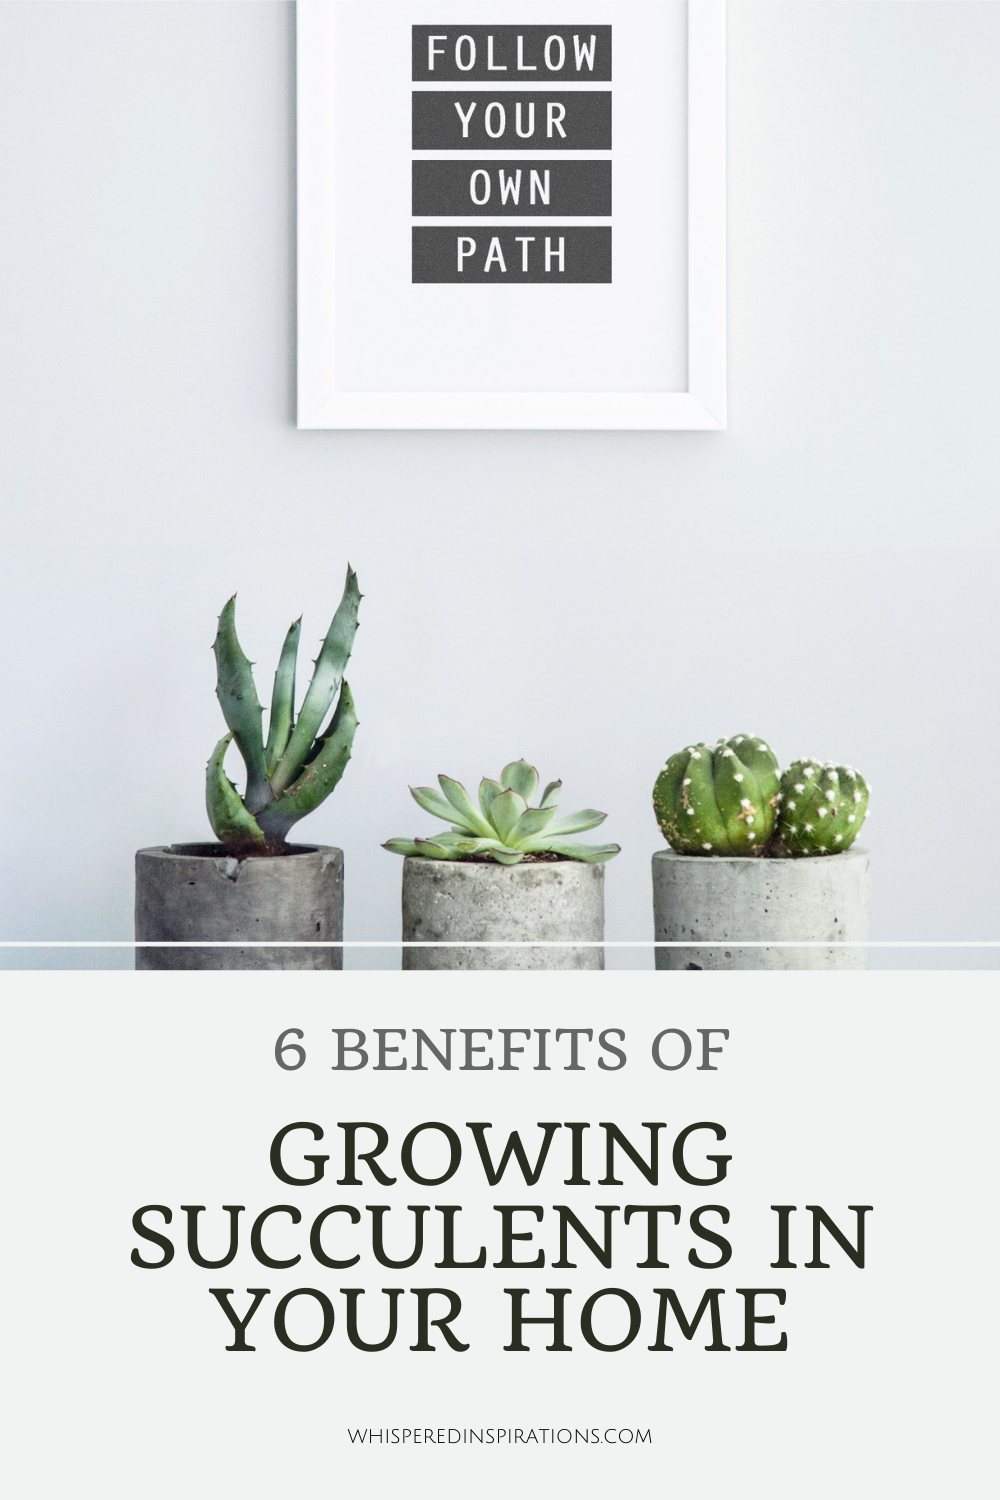 A wall art says, "Follow Your Own Path," and below are 3 succulents. This article covers the 6 benefits of growing succulents in your home.